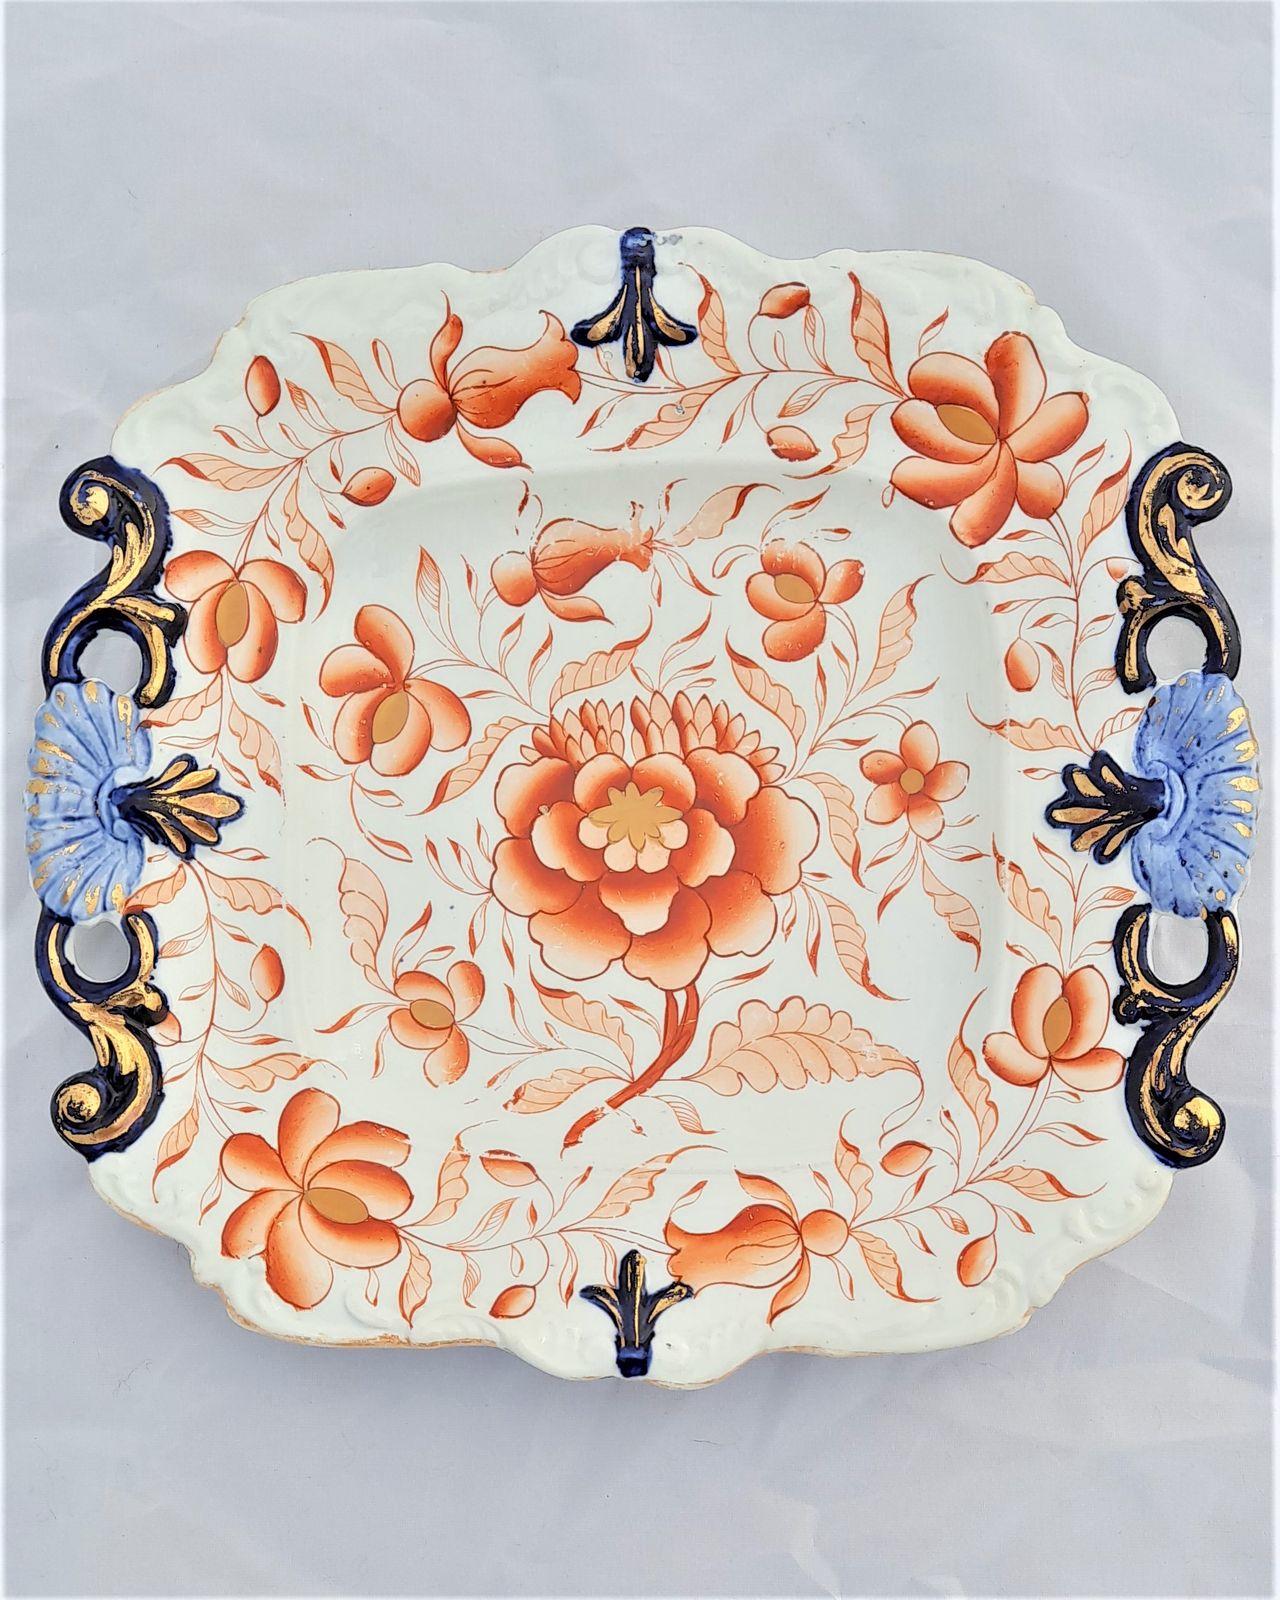 Antique New Hall Porcelain Inverted Shell or Dropped Shell Dessert Service - 9 pieces - Hand Painted Imari Pattern low relief moulded - Antique ca 1820 - 4 kg